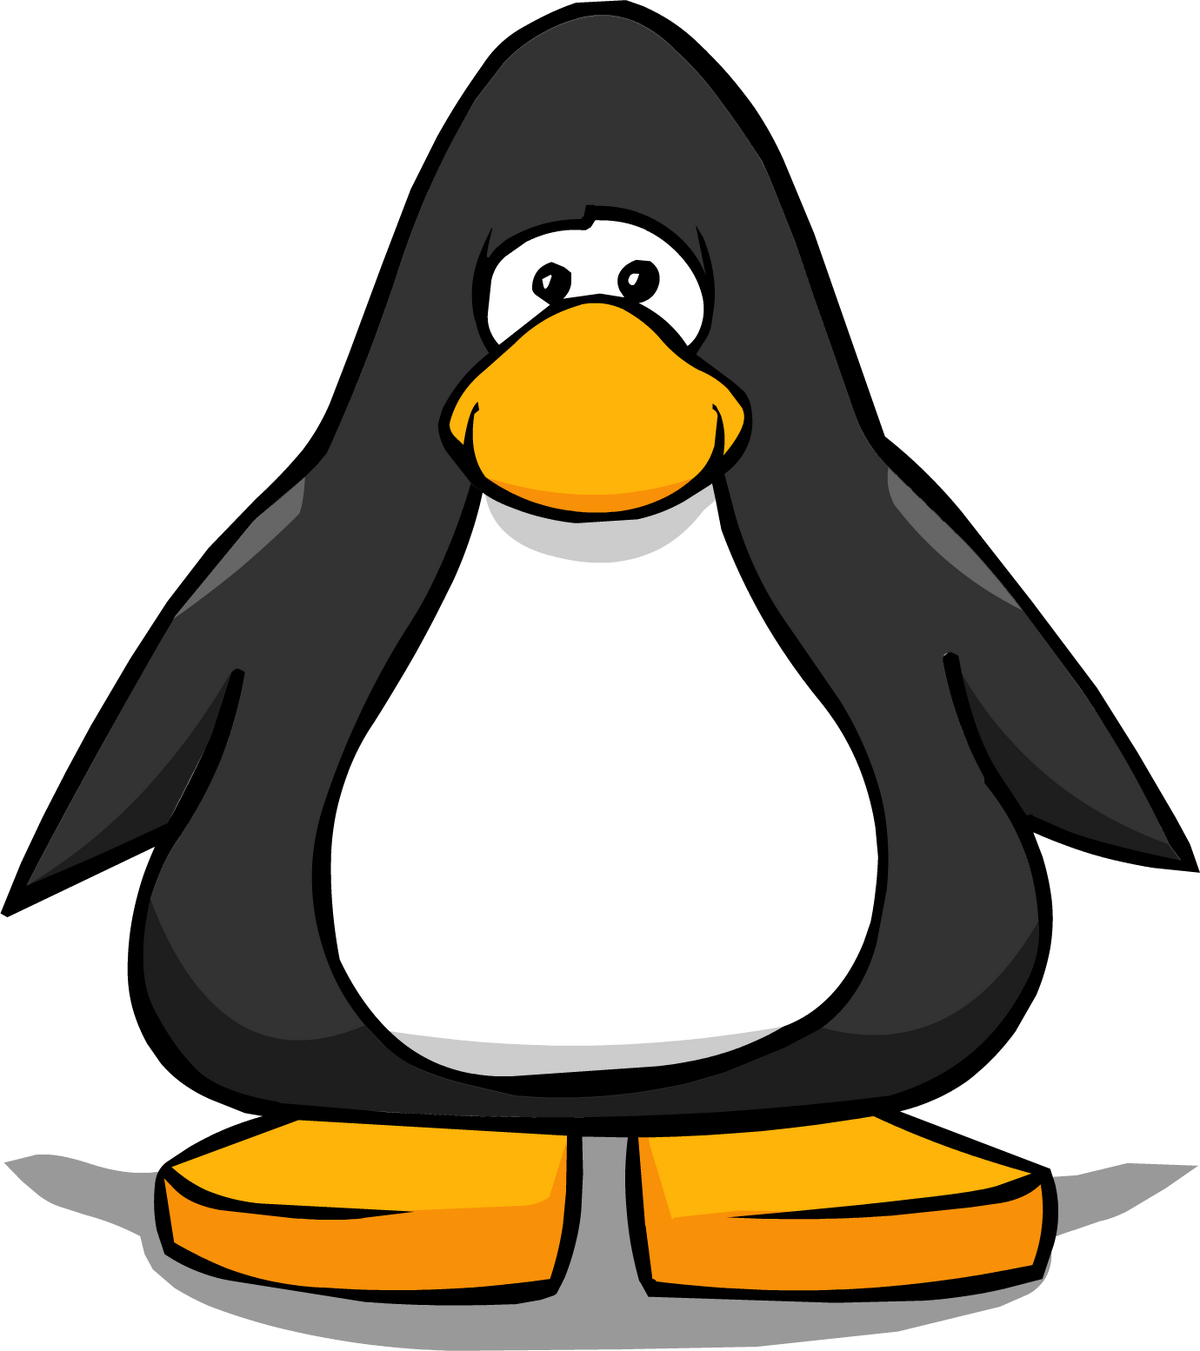 How To Create Your Own Club Penguin Account 